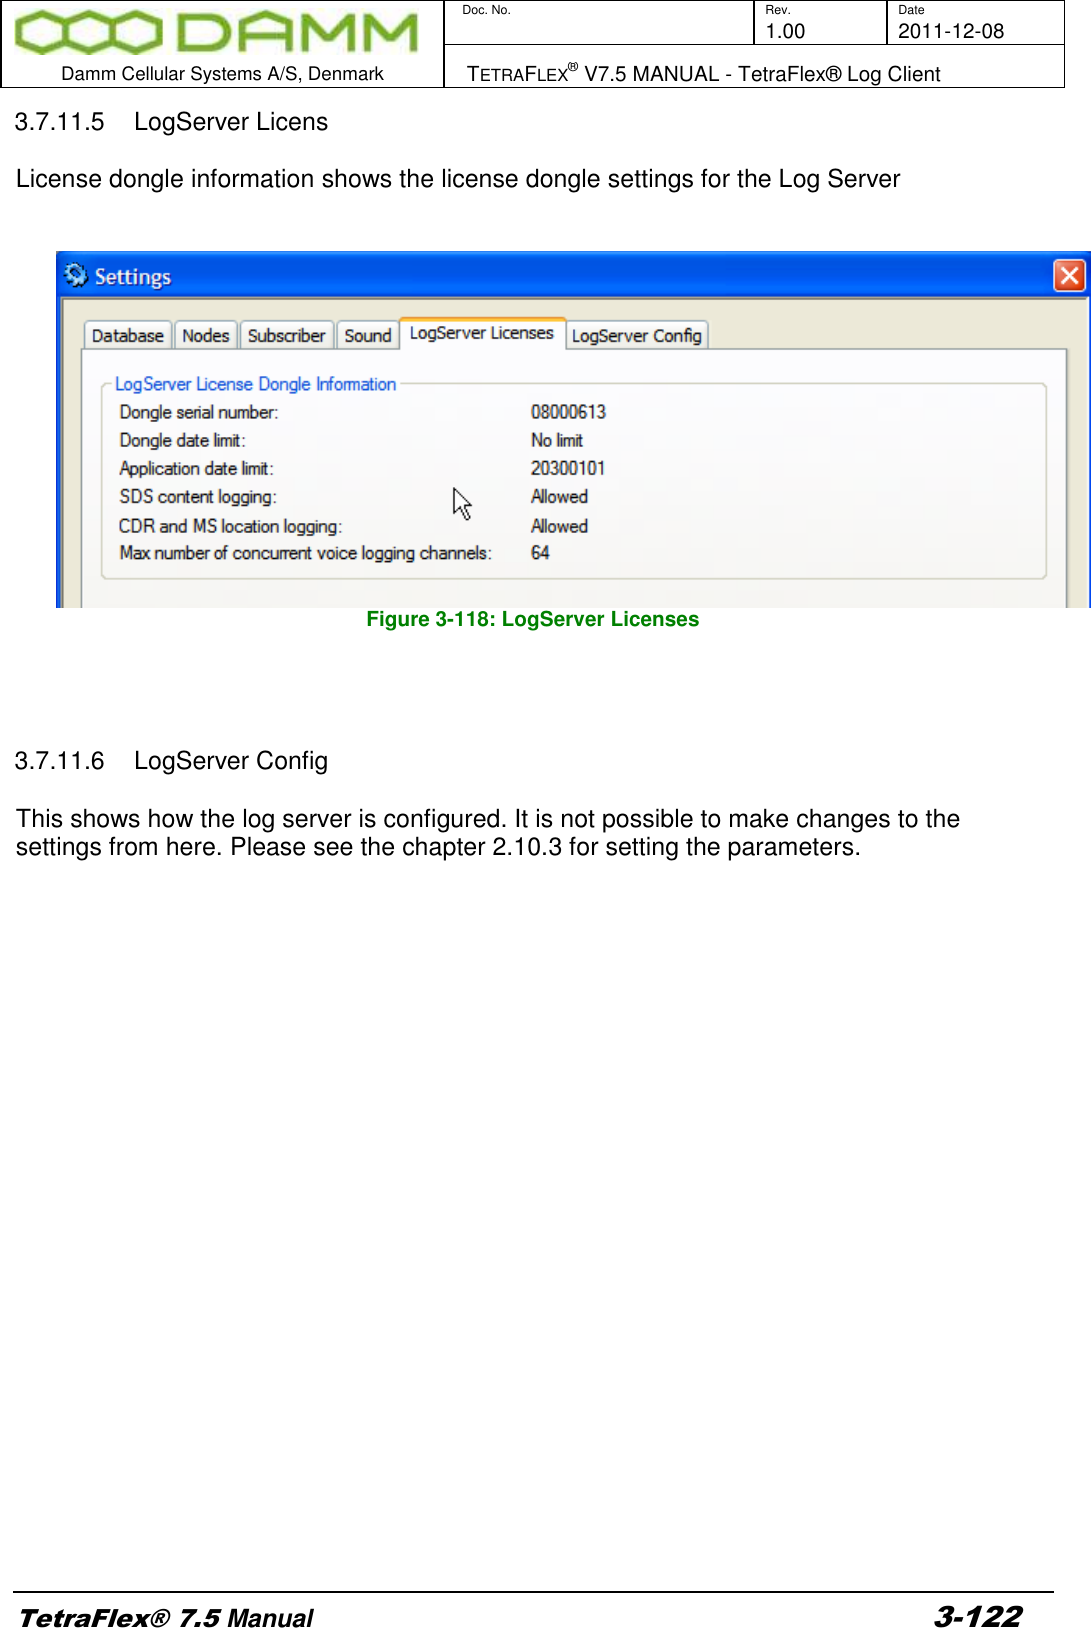        Doc. No. Rev. Date     1.00 2011-12-08  Damm Cellular Systems A/S, Denmark   TETRAFLEX® V7.5 MANUAL - TetraFlex® Log Client  TetraFlex® 7.5 Manual 3-122 3.7.11.5  LogServer Licens  License dongle information shows the license dongle settings for the Log Server     Figure 3-118: LogServer Licenses     3.7.11.6  LogServer Config  This shows how the log server is configured. It is not possible to make changes to the settings from here. Please see the chapter 2.10.3 for setting the parameters.  